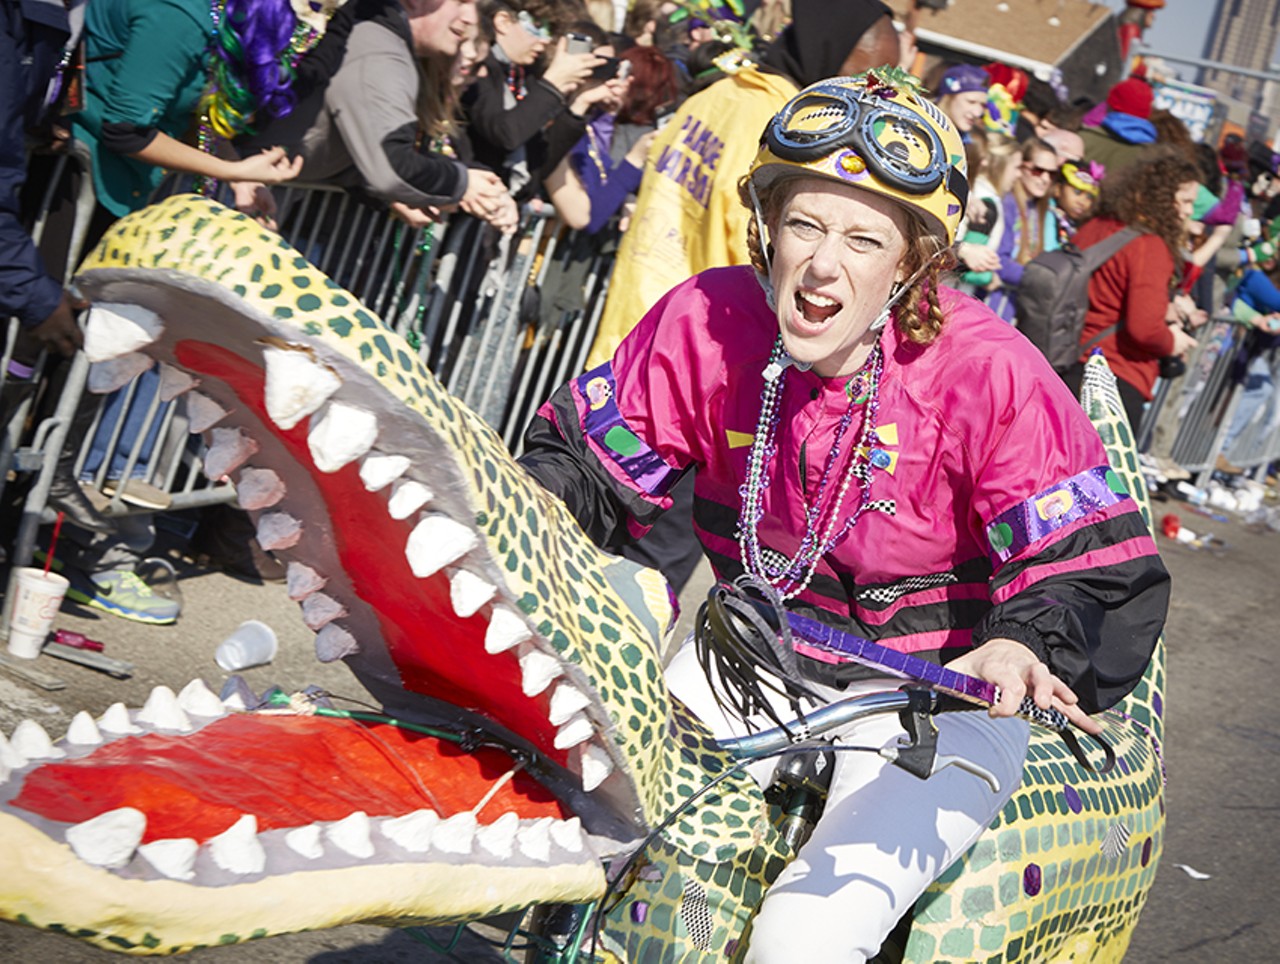 This biker who is racing away on a crocodile. Seriously, get on her level, people.